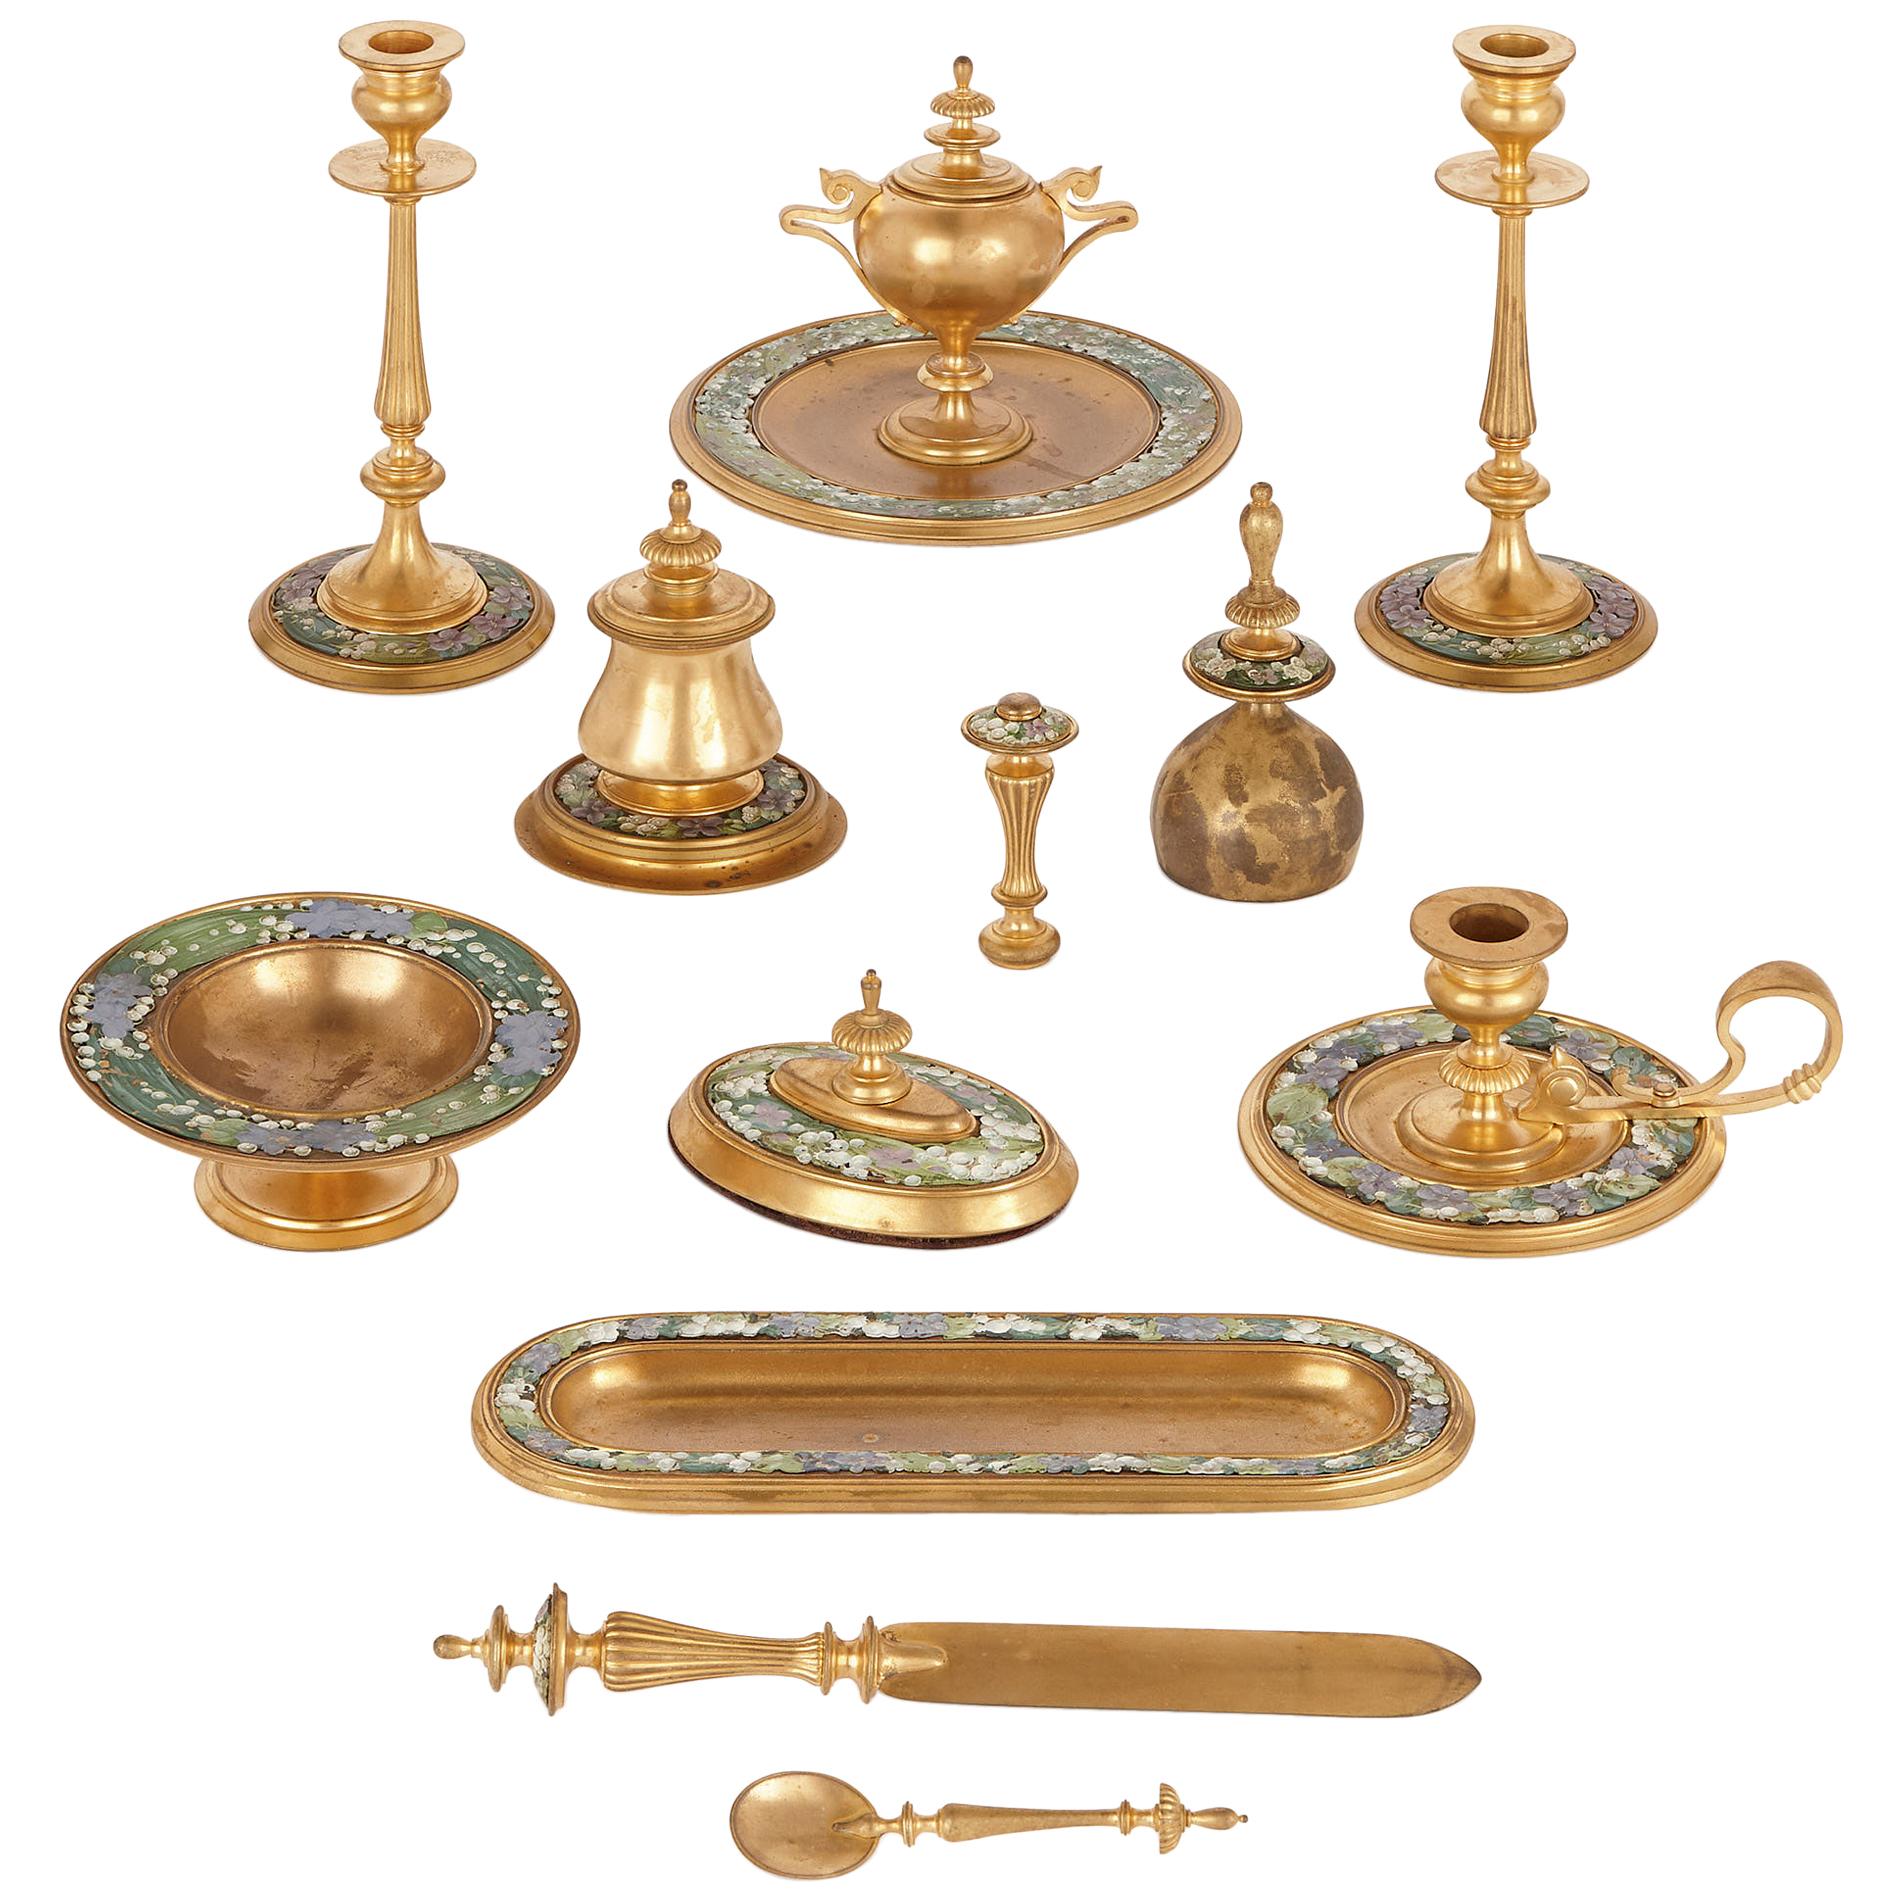 Twelve 19th Century Painted and Gilt Metal Desk Accessories